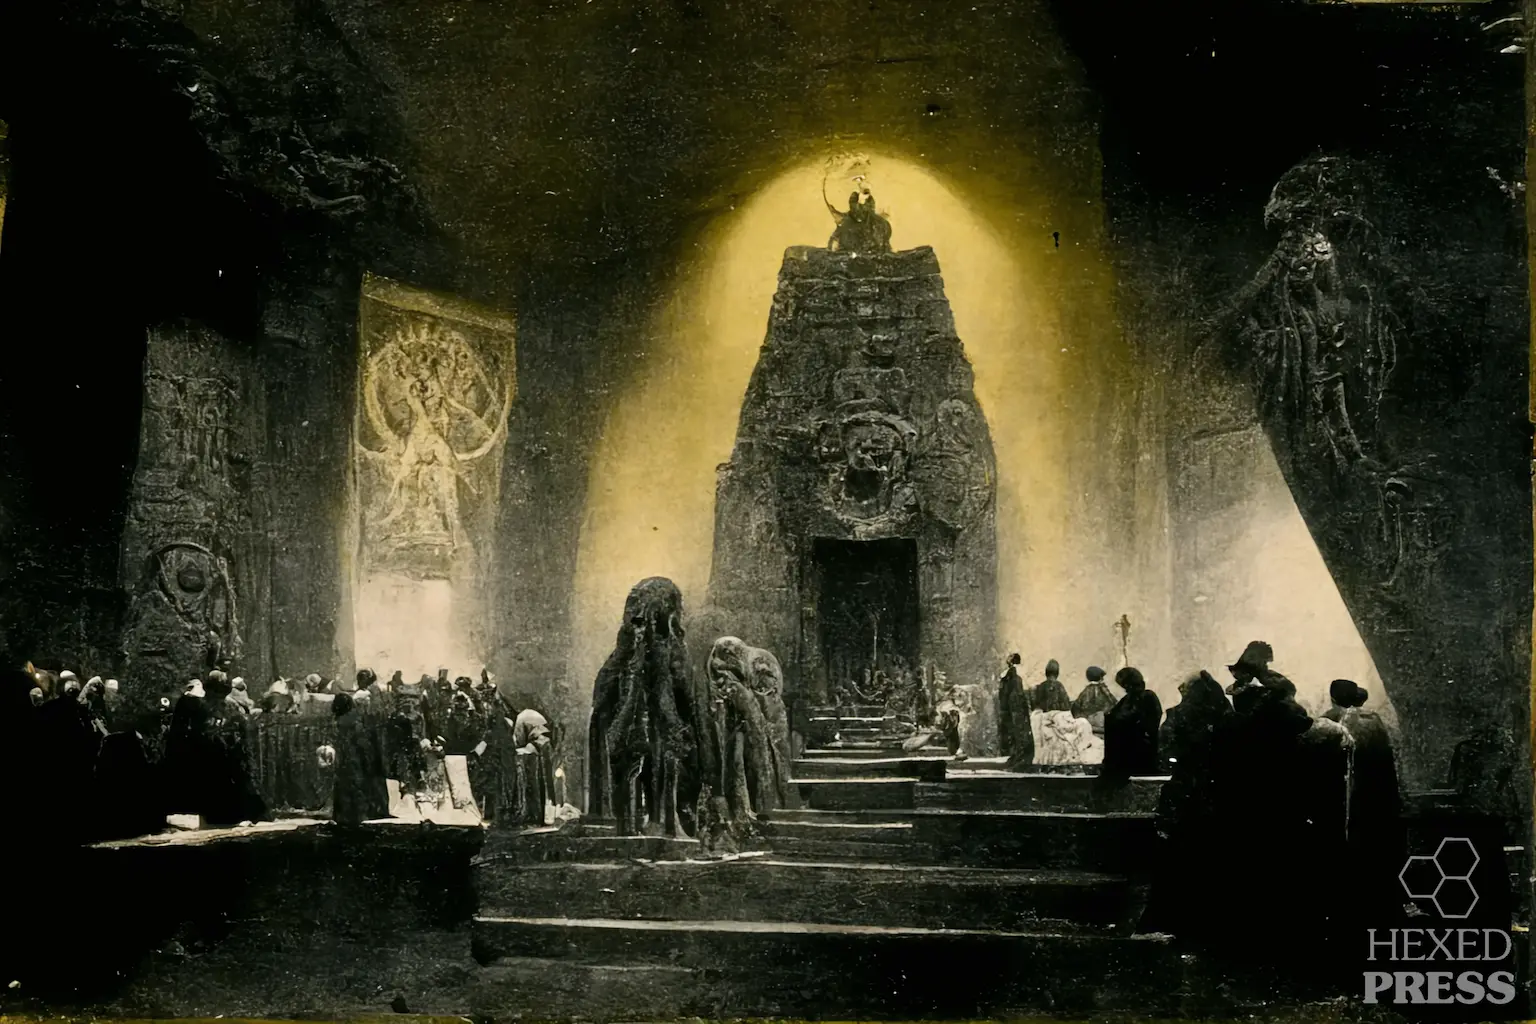 Todd_1930s_photograph_hall_of_worship_temple_of_the_death_godde_c215a771-1708-43fa-a894-01fbb77a917e-4x_RealSR_DF2K_JPEG.50.4x_BSRGAN.50 - Copy_marked